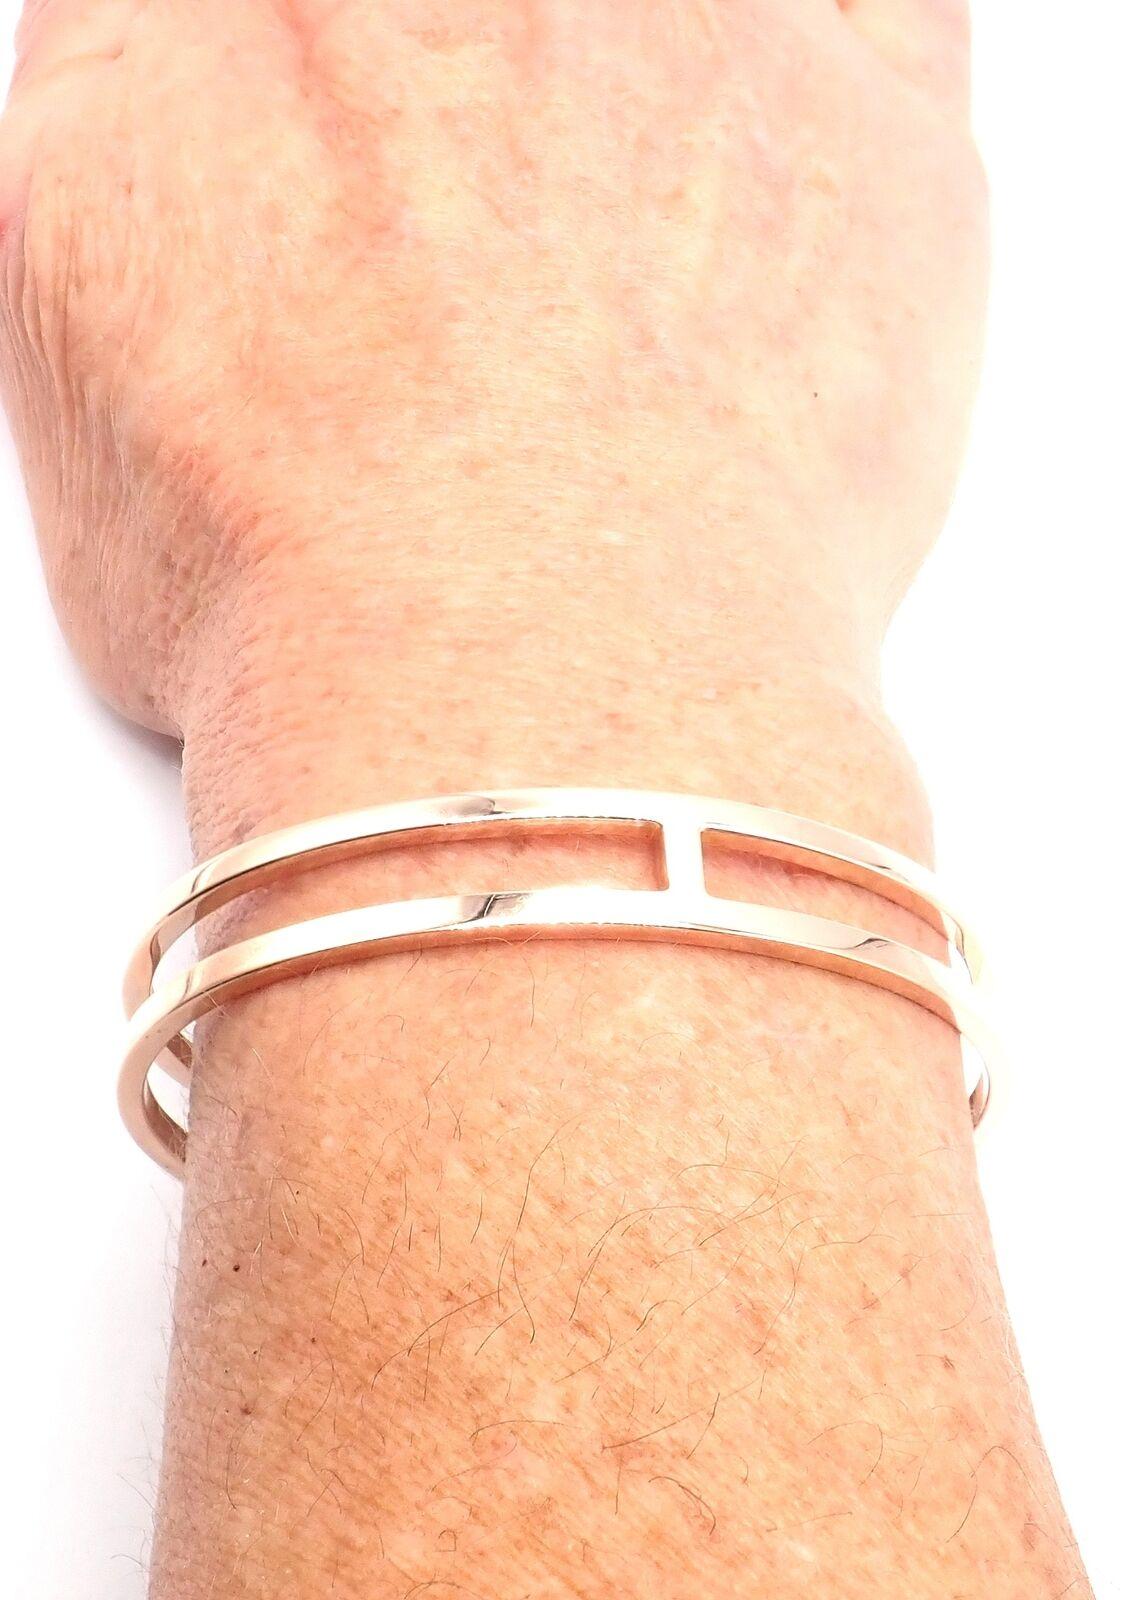 Hermes H Open Rose Gold Cuff Bangle Bracelet In Excellent Condition For Sale In Holland, PA